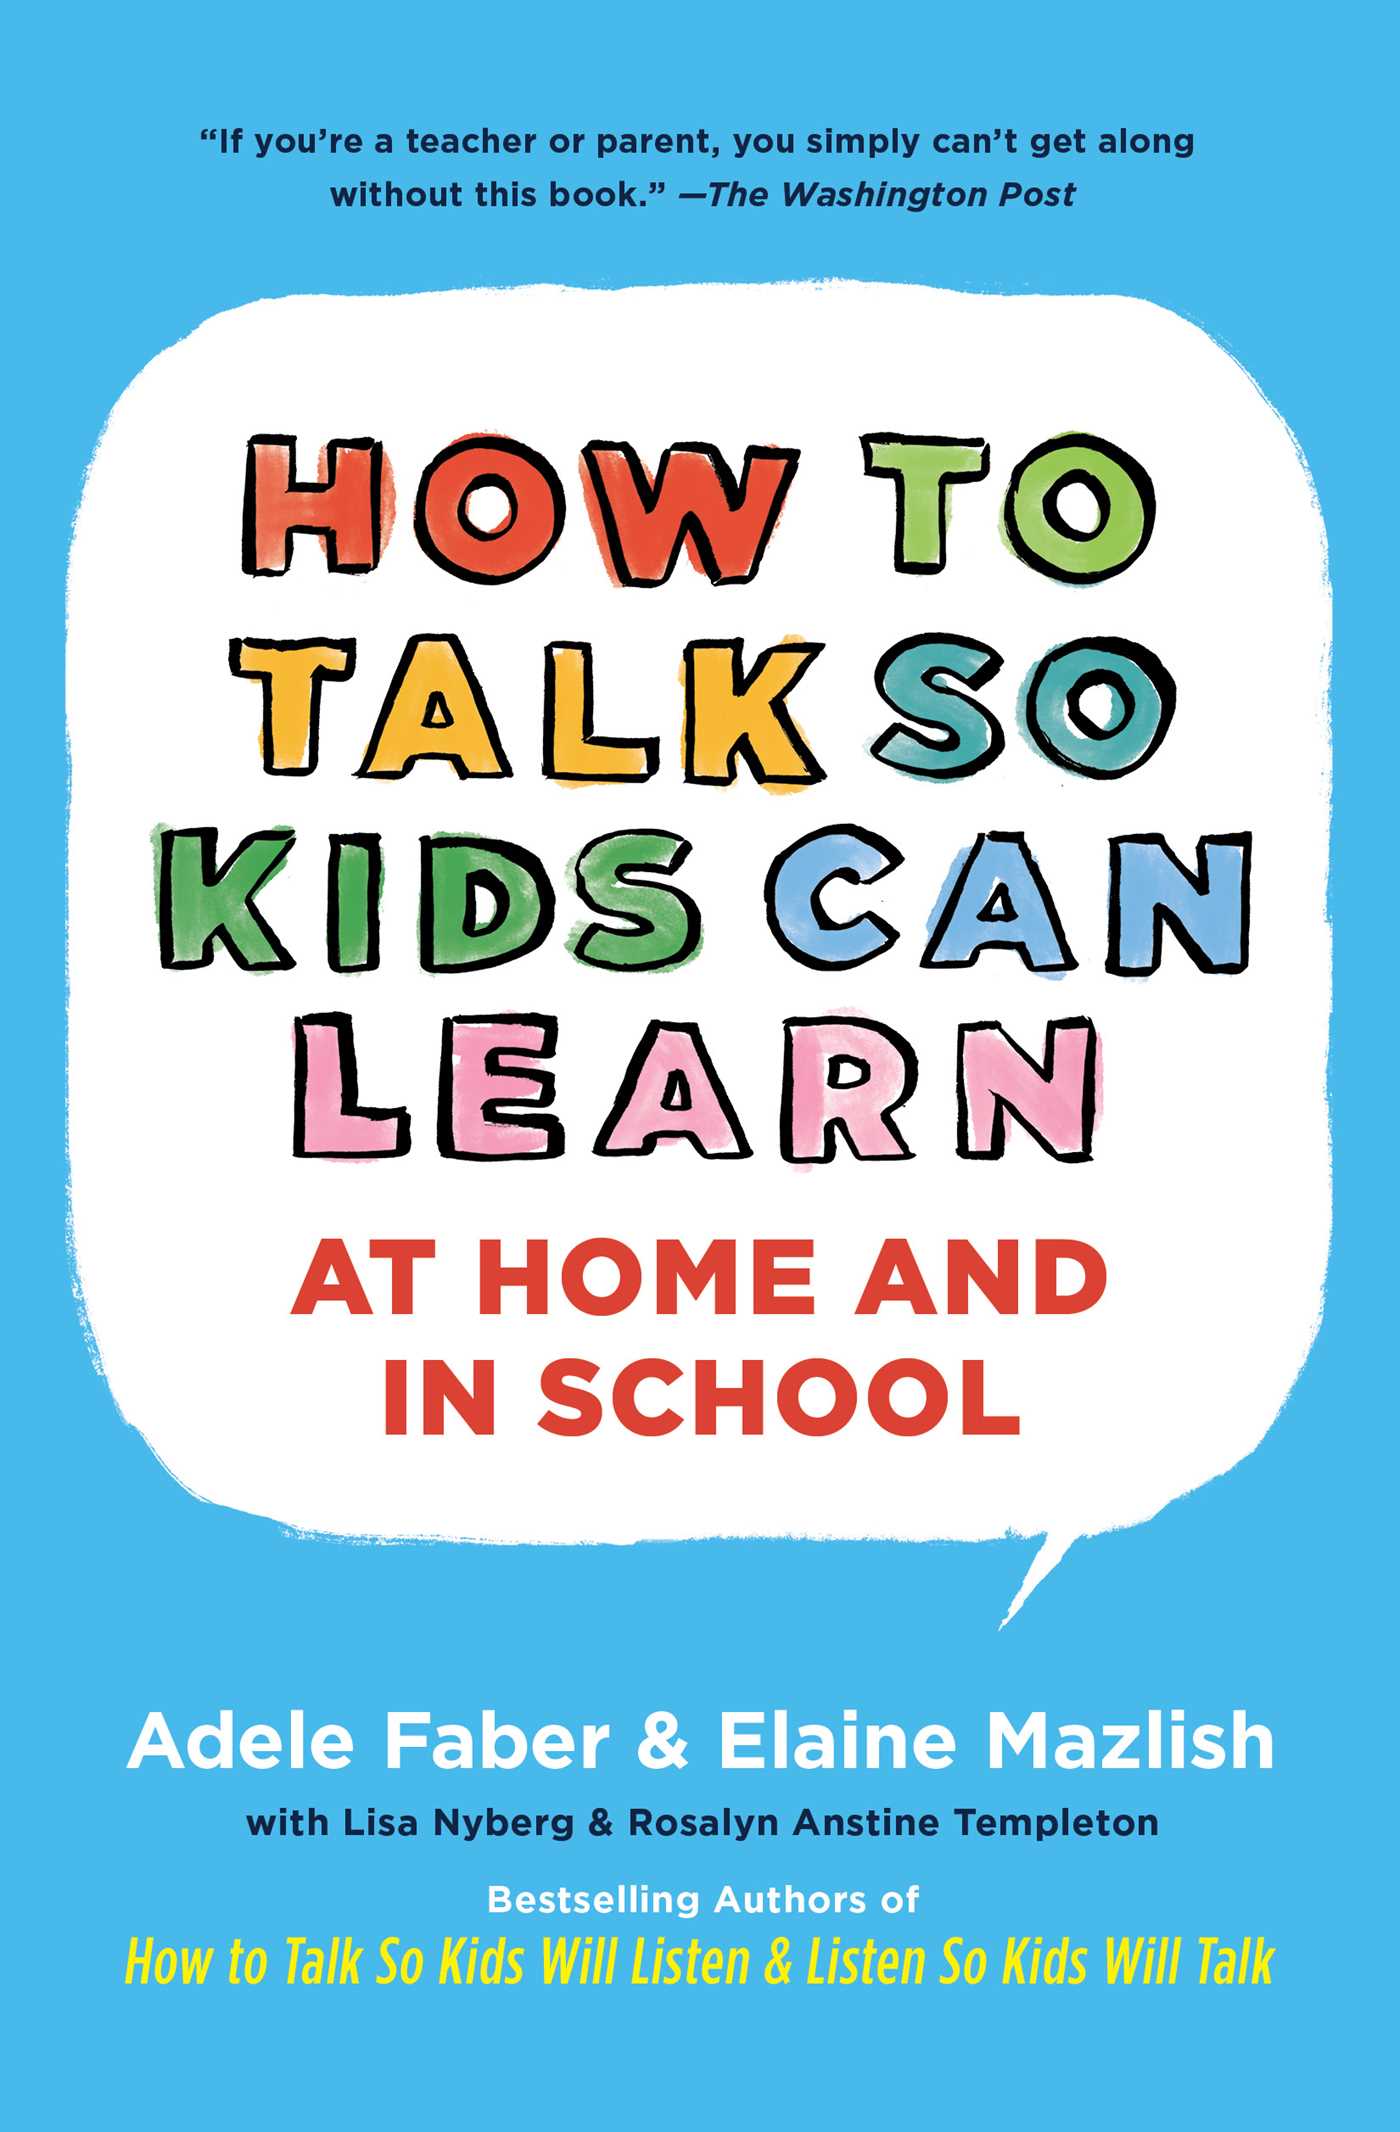 How To Talk So Kids Can Learn - 10-14.99